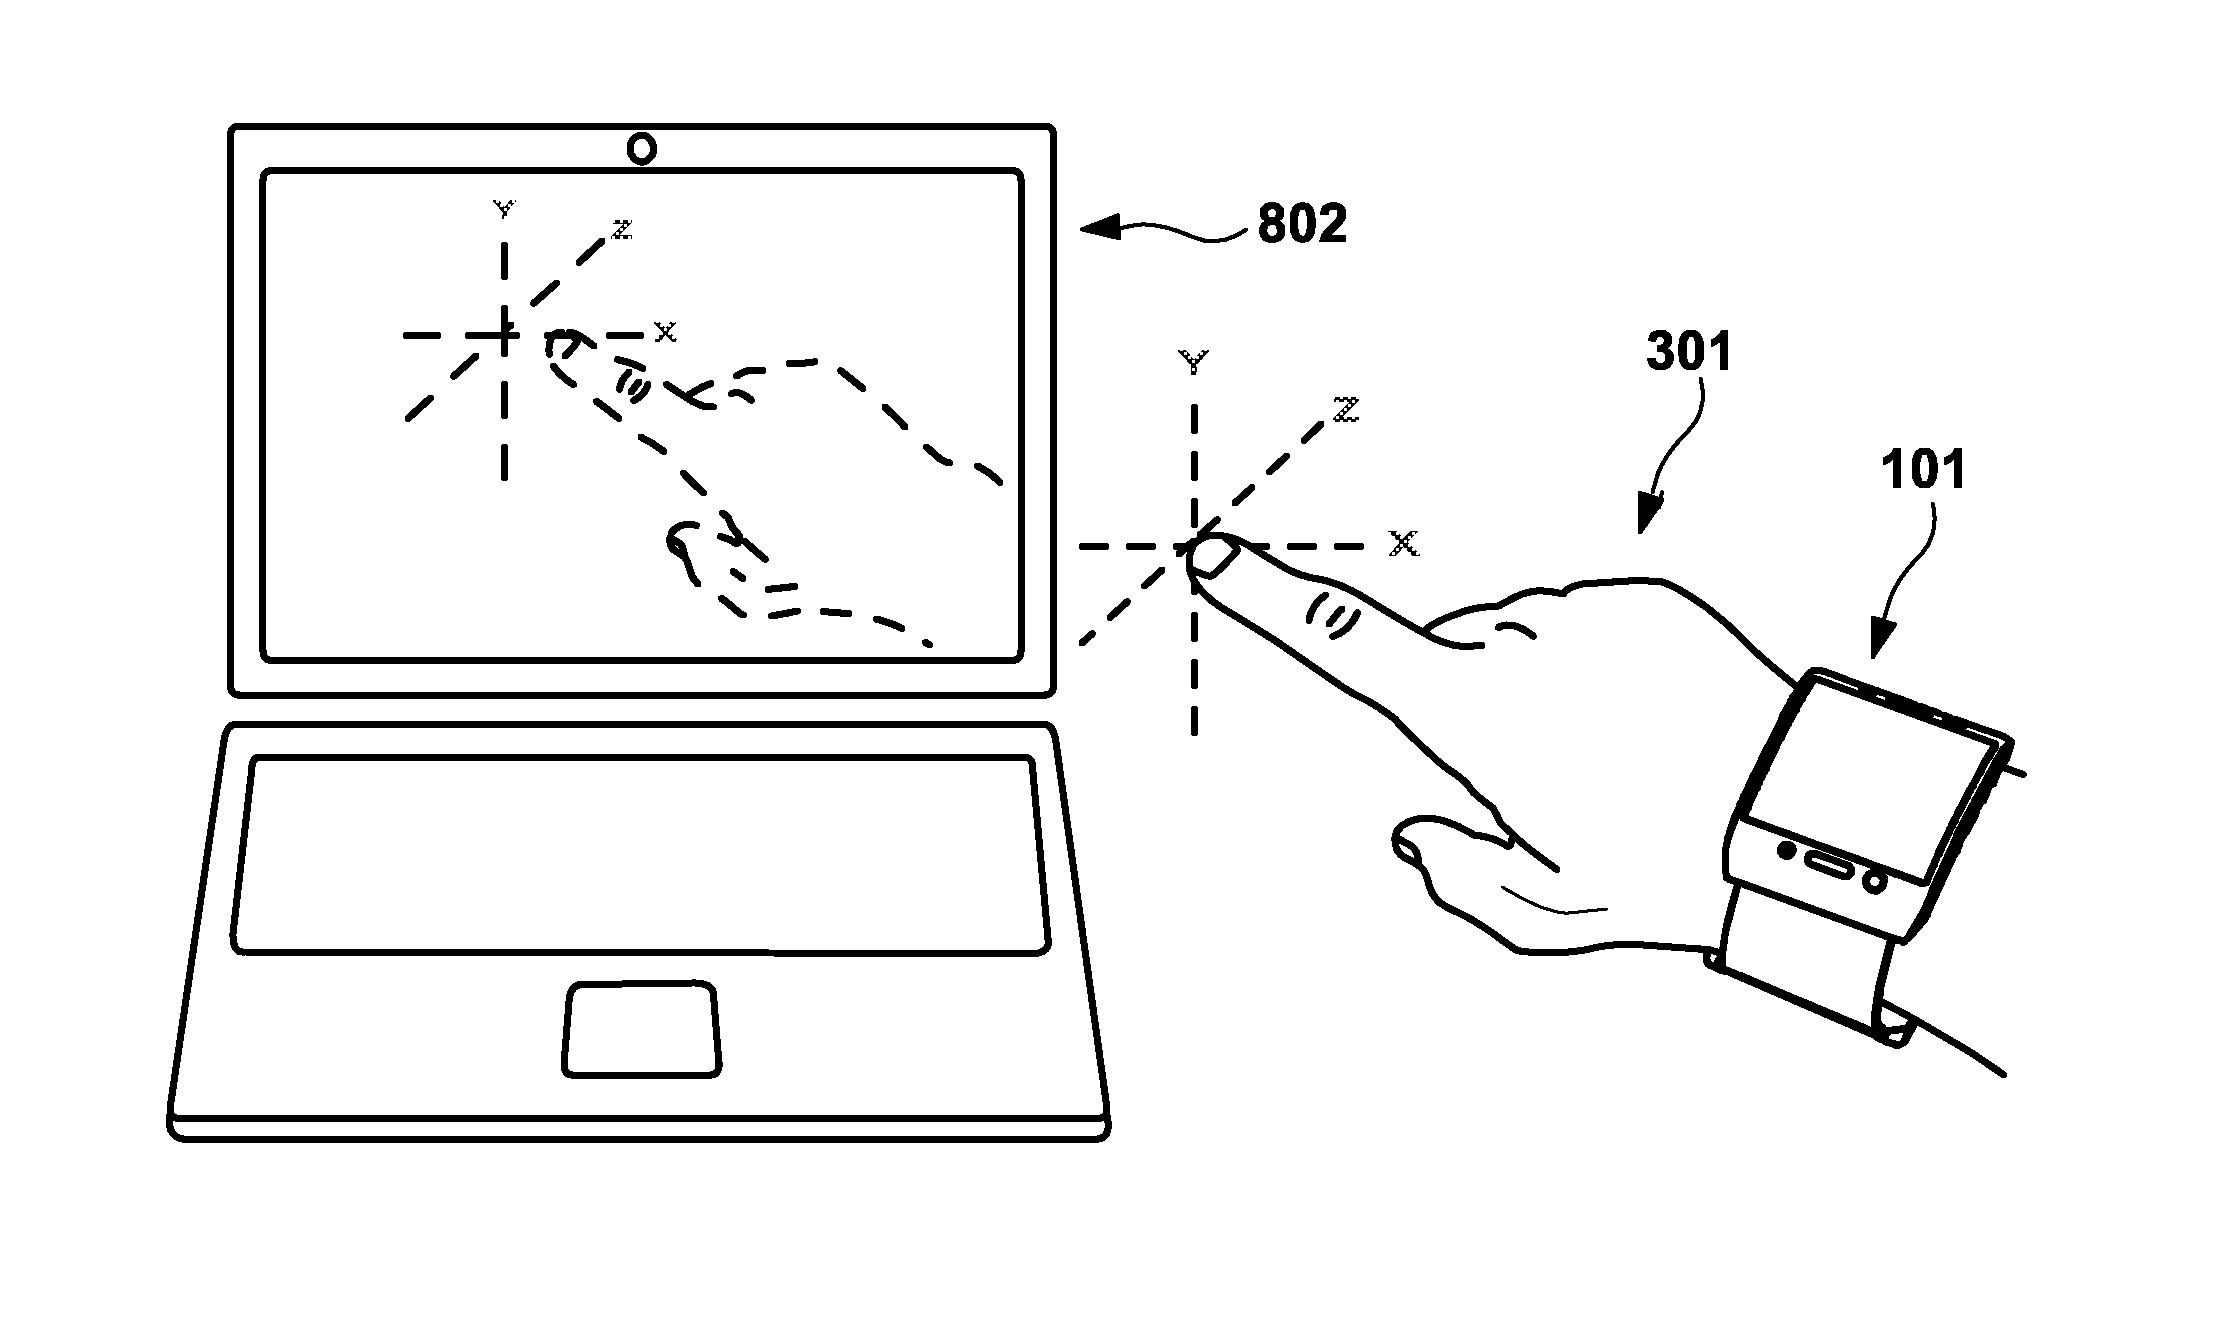 Wireless wrist computing and control device and method for 3D imaging, mapping, networking and interfacing